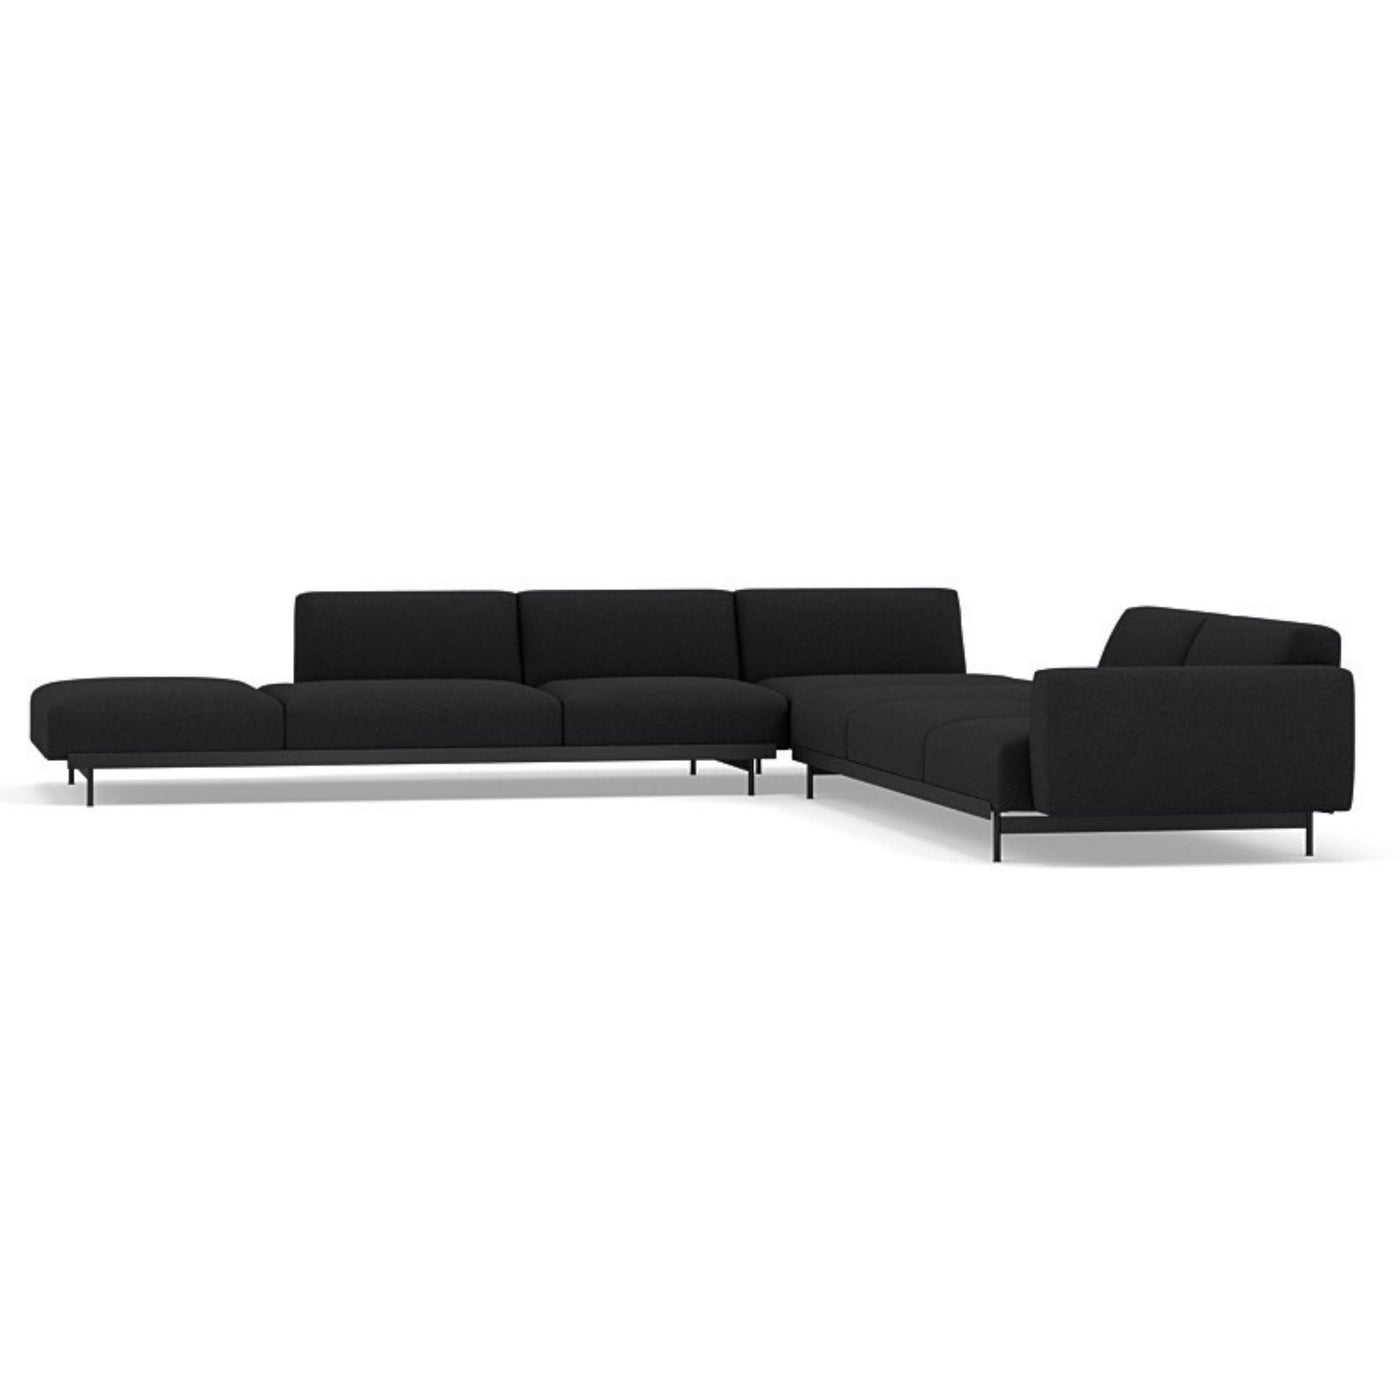 Muuto In Situ corner sofa, configuration 8. Made to order from someday designs. #colour_divina-md-193